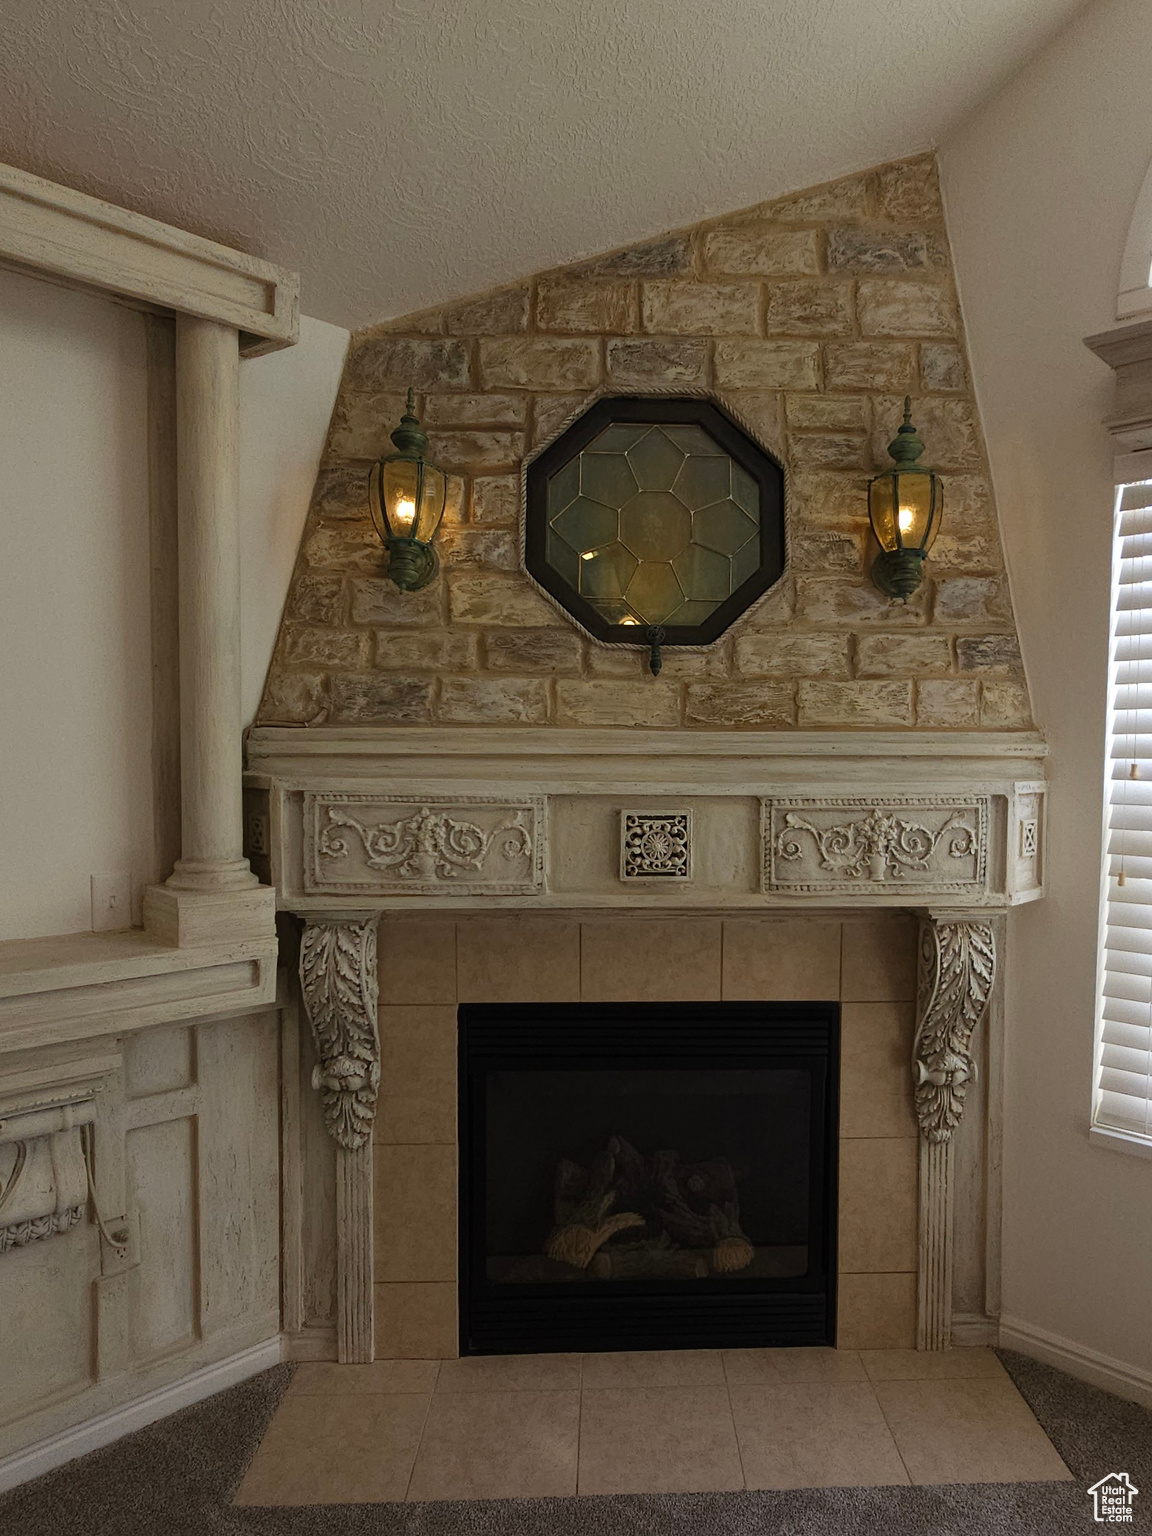 One-of-a-kind European-styled fireplace and hearth warms the great room.